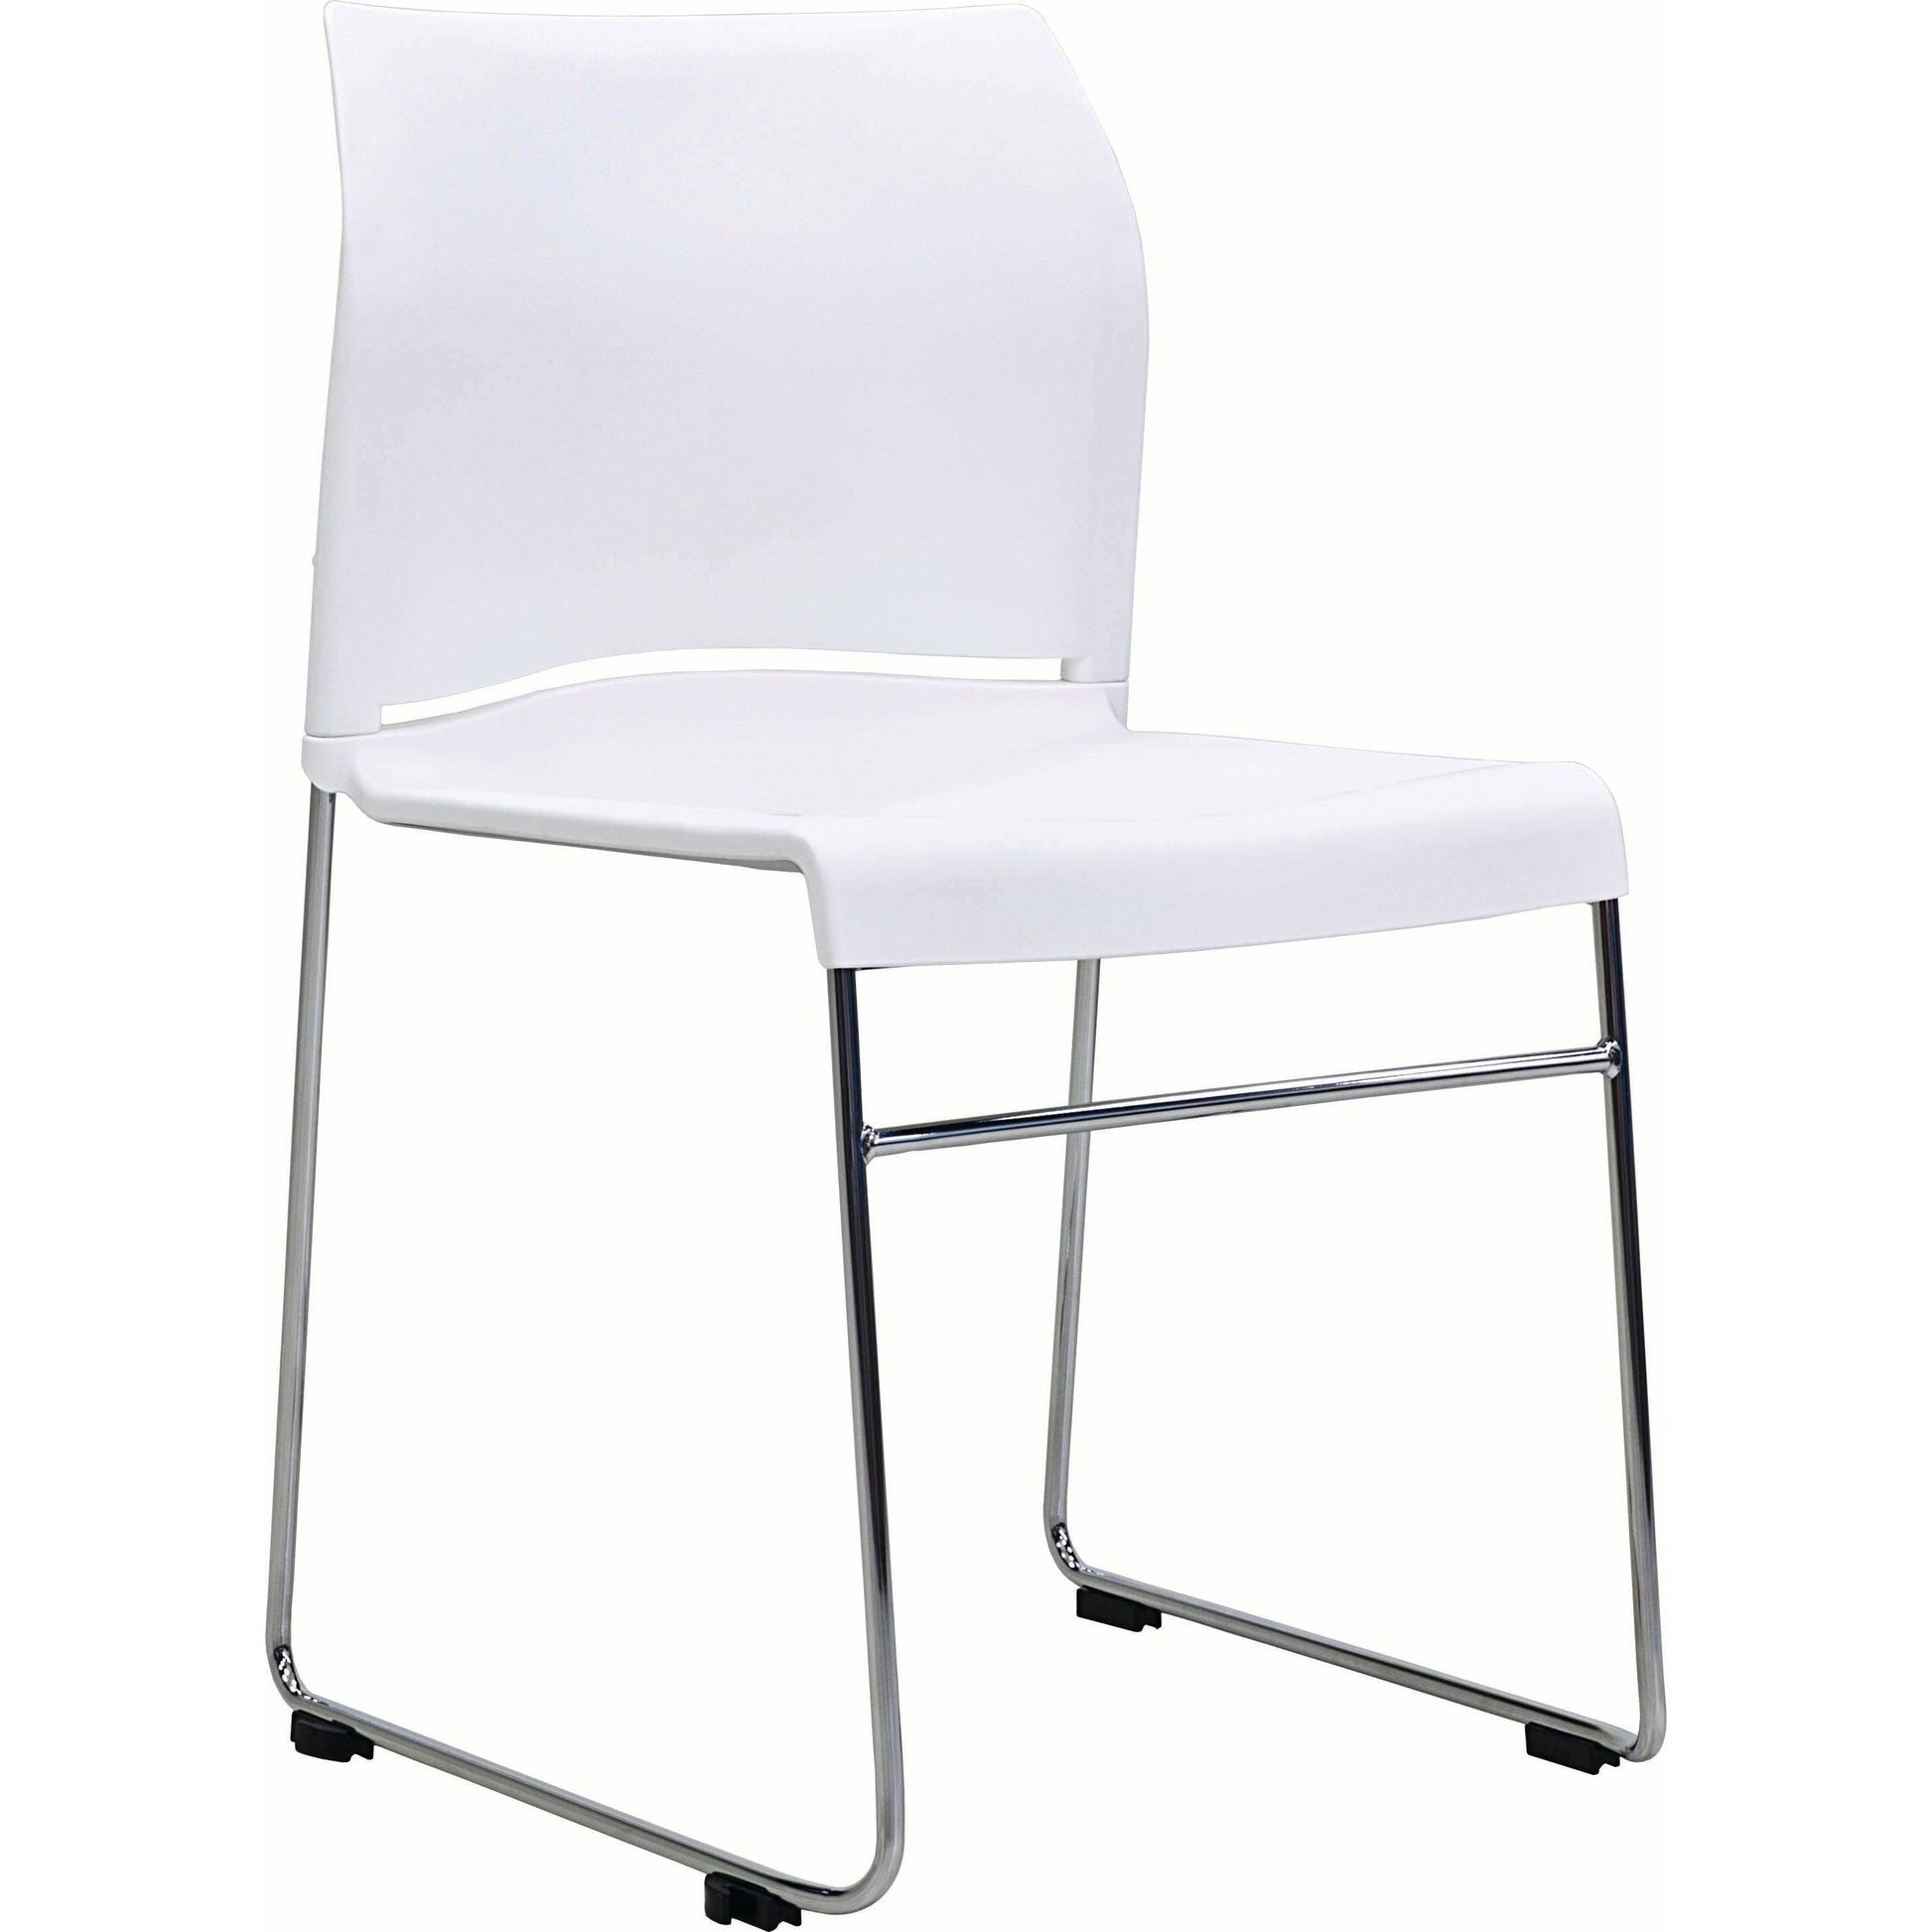 Envy Chair-Stackable seating-Smart Office Furniture